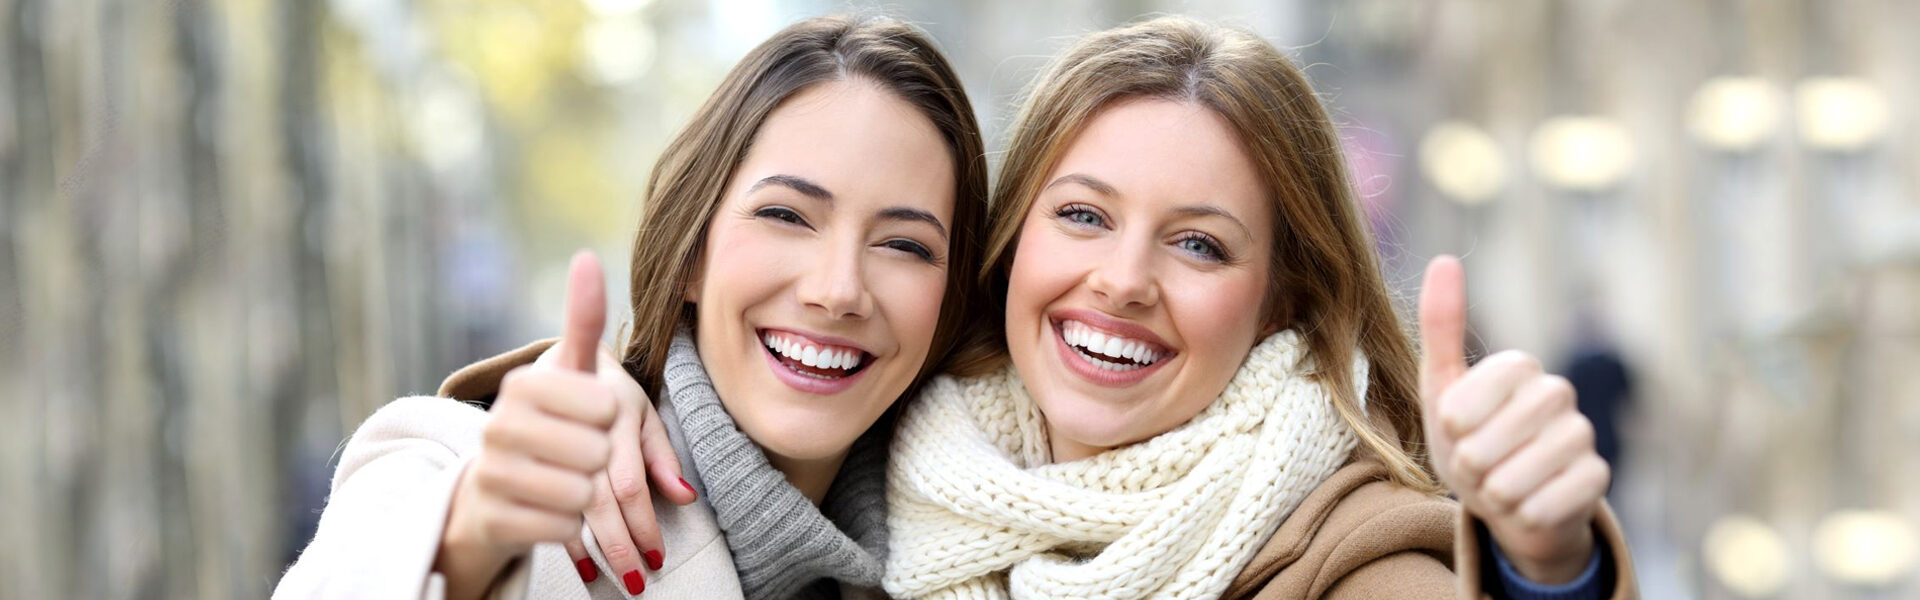 Things You Need To Know Before Going For Teeth Bonding